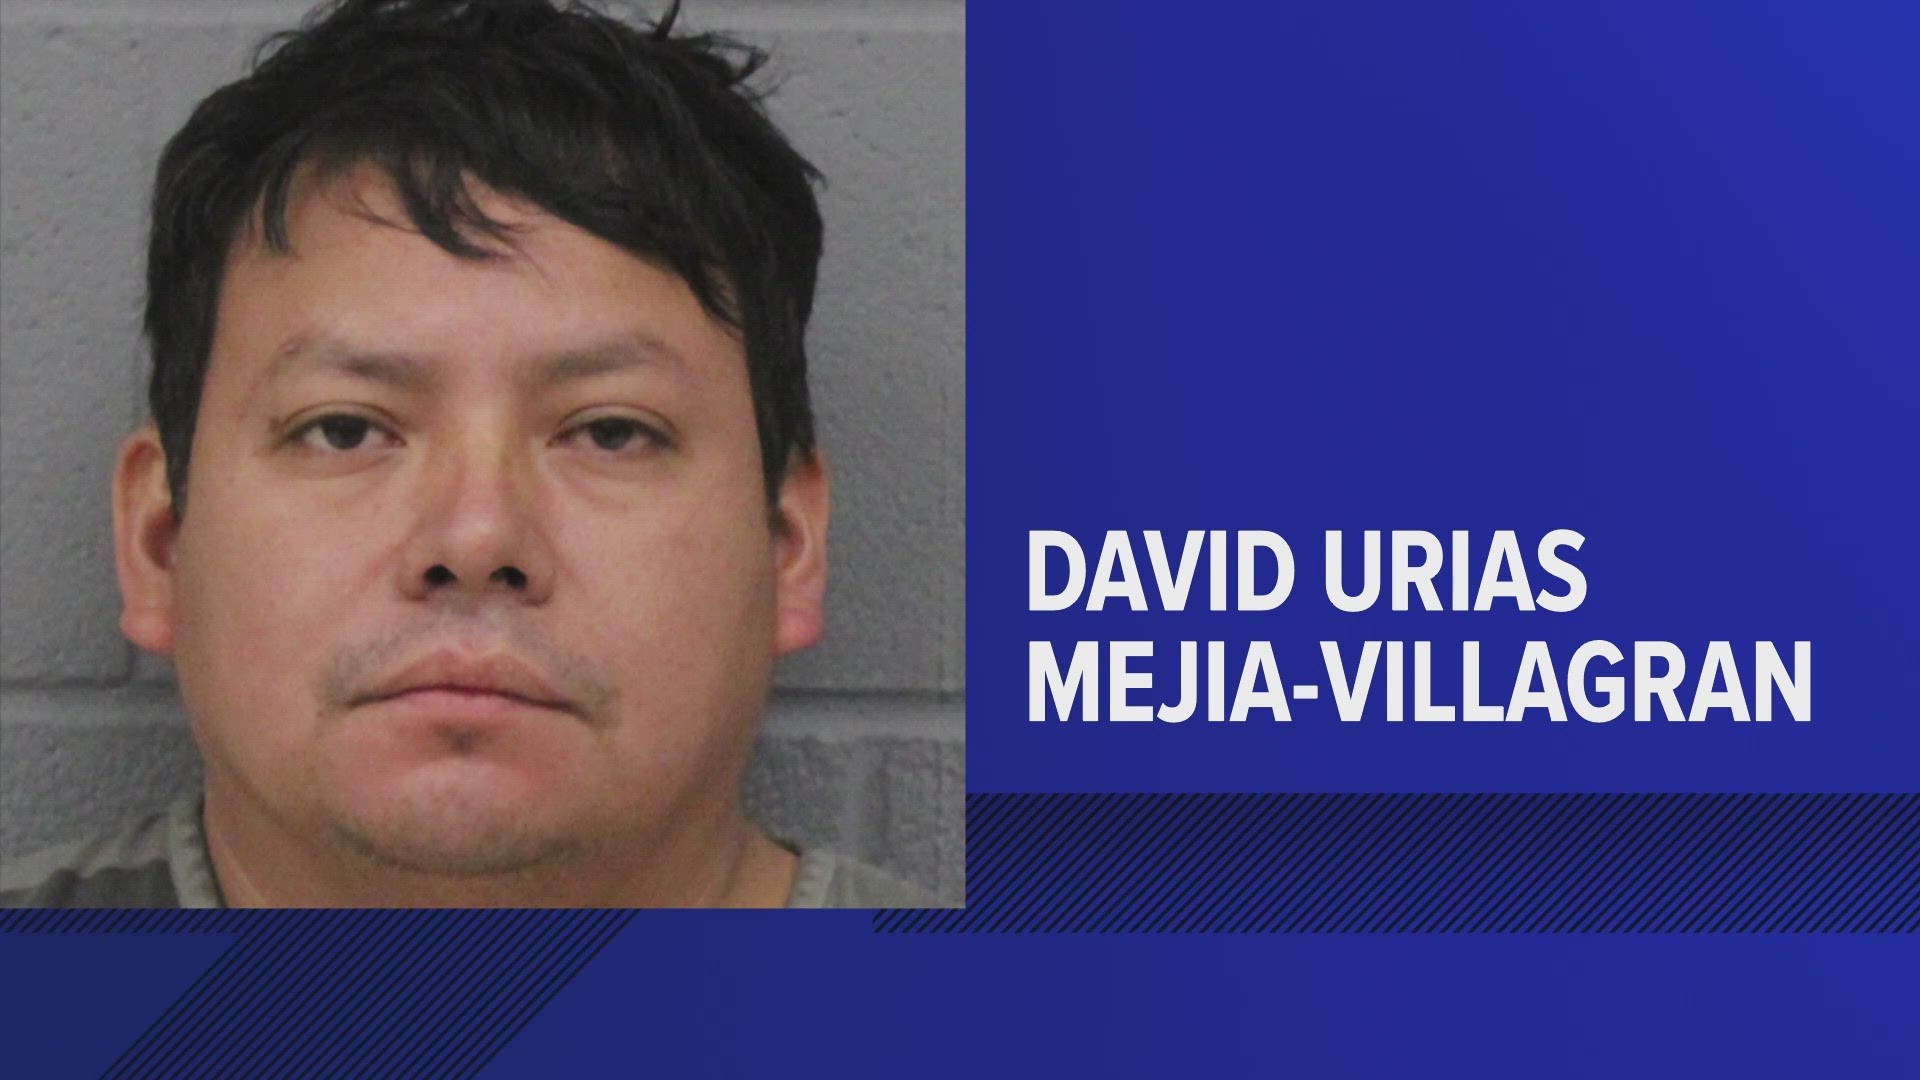 David Urias Mejia-Villagran, 42, is accused of killing 28-year-old Jorge Ordonez-Perez at an apartment complex on Willow Creek Drive.